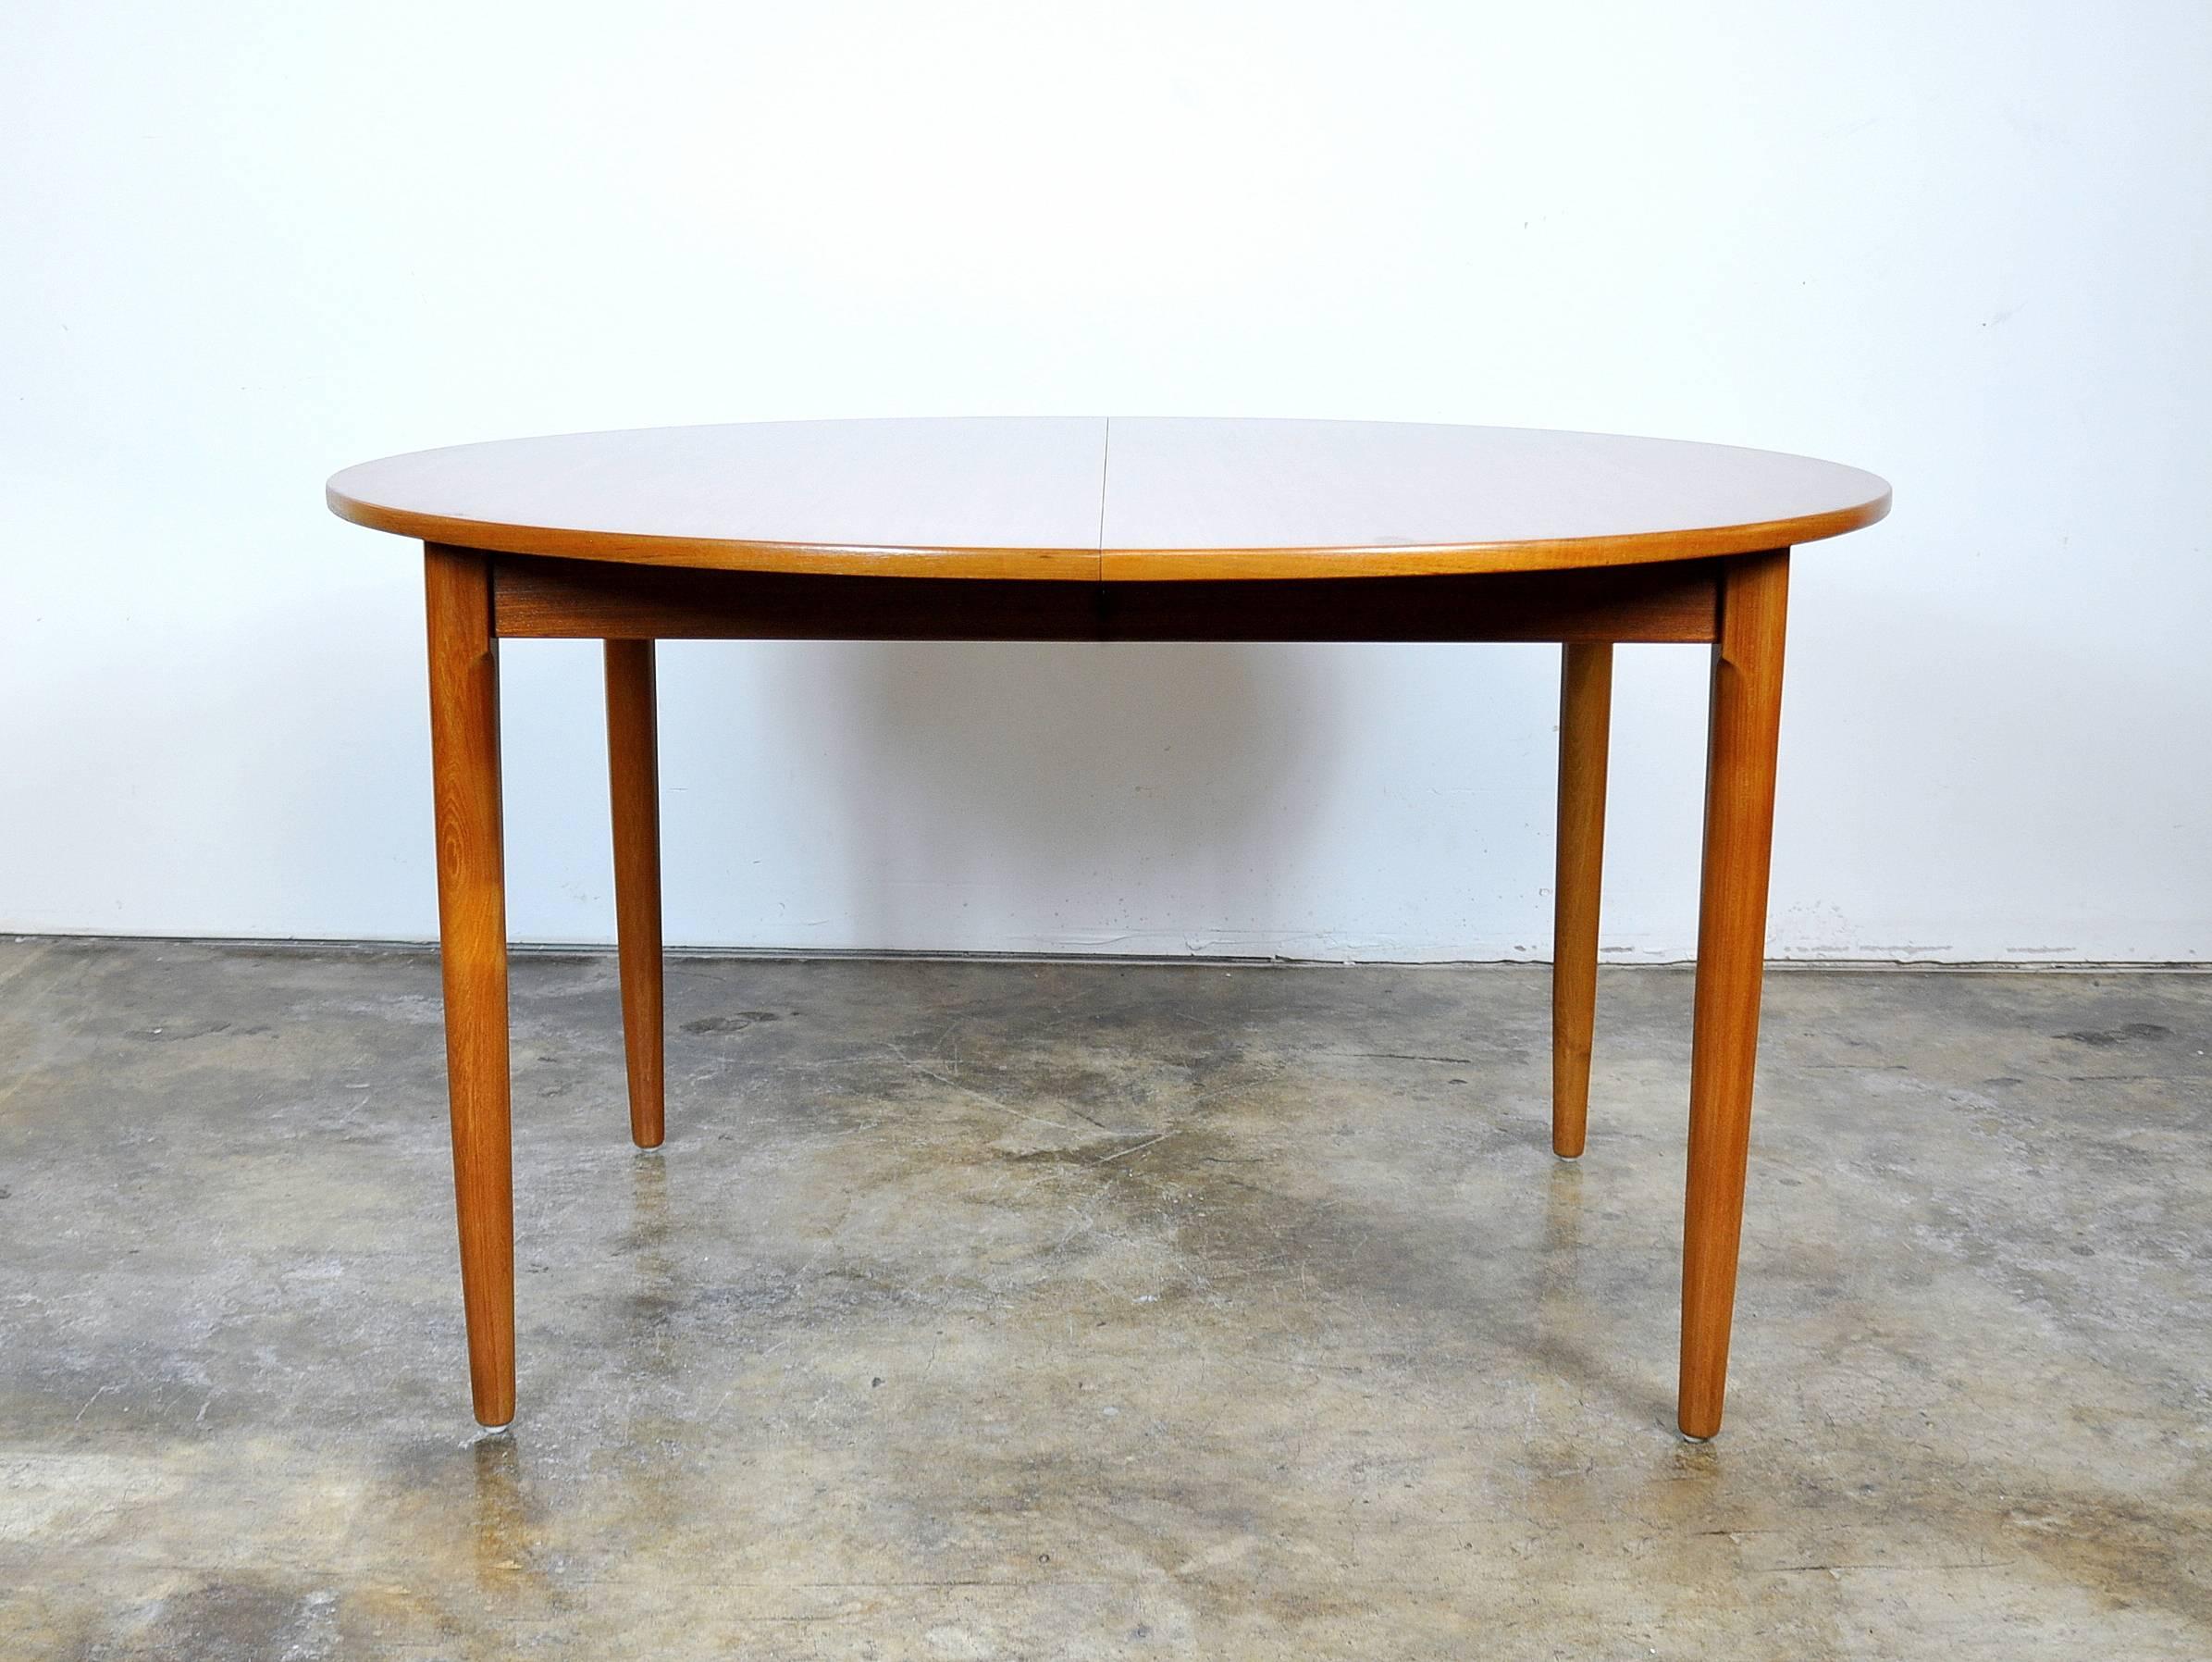 A Mid-Century Danish Modern round dining table manufactured in Denmark by Falster and dating from the 1960s. The table has been professionally refinished and exhibits beautiful grain patterns. It seats four when compact, but can be extended with a